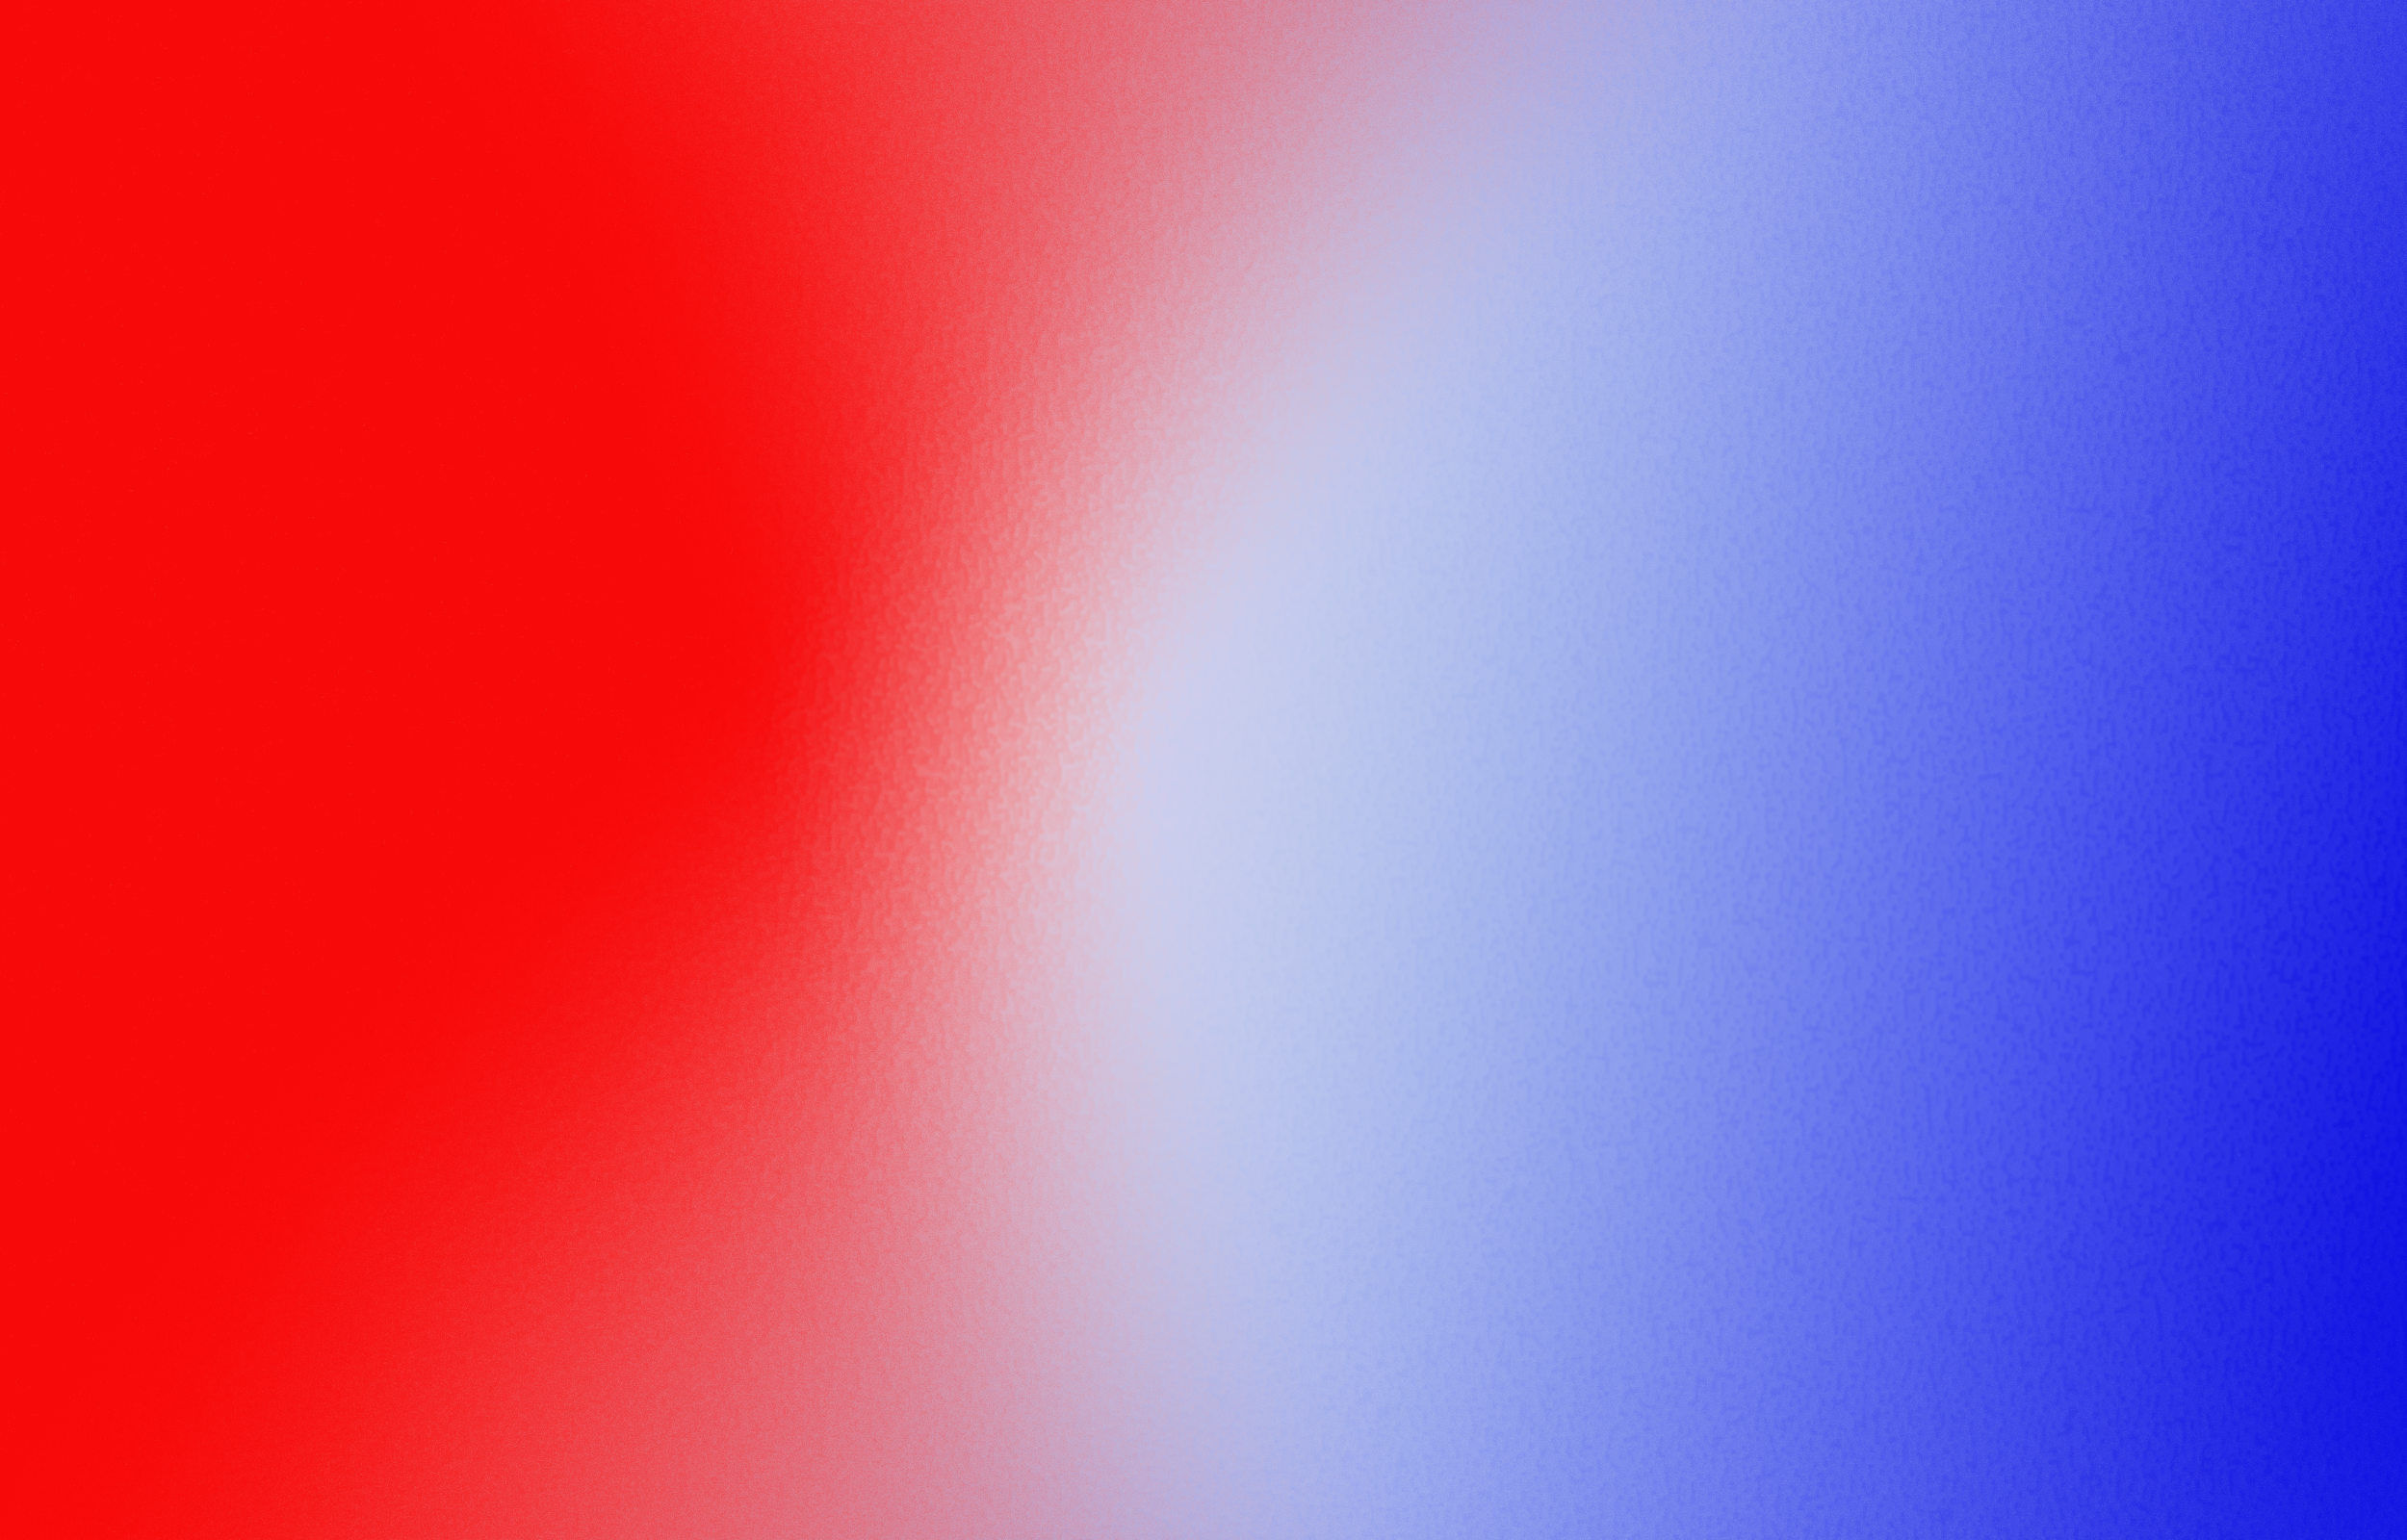 44+] Red White and Blue Wallpapers - WallpaperSafari